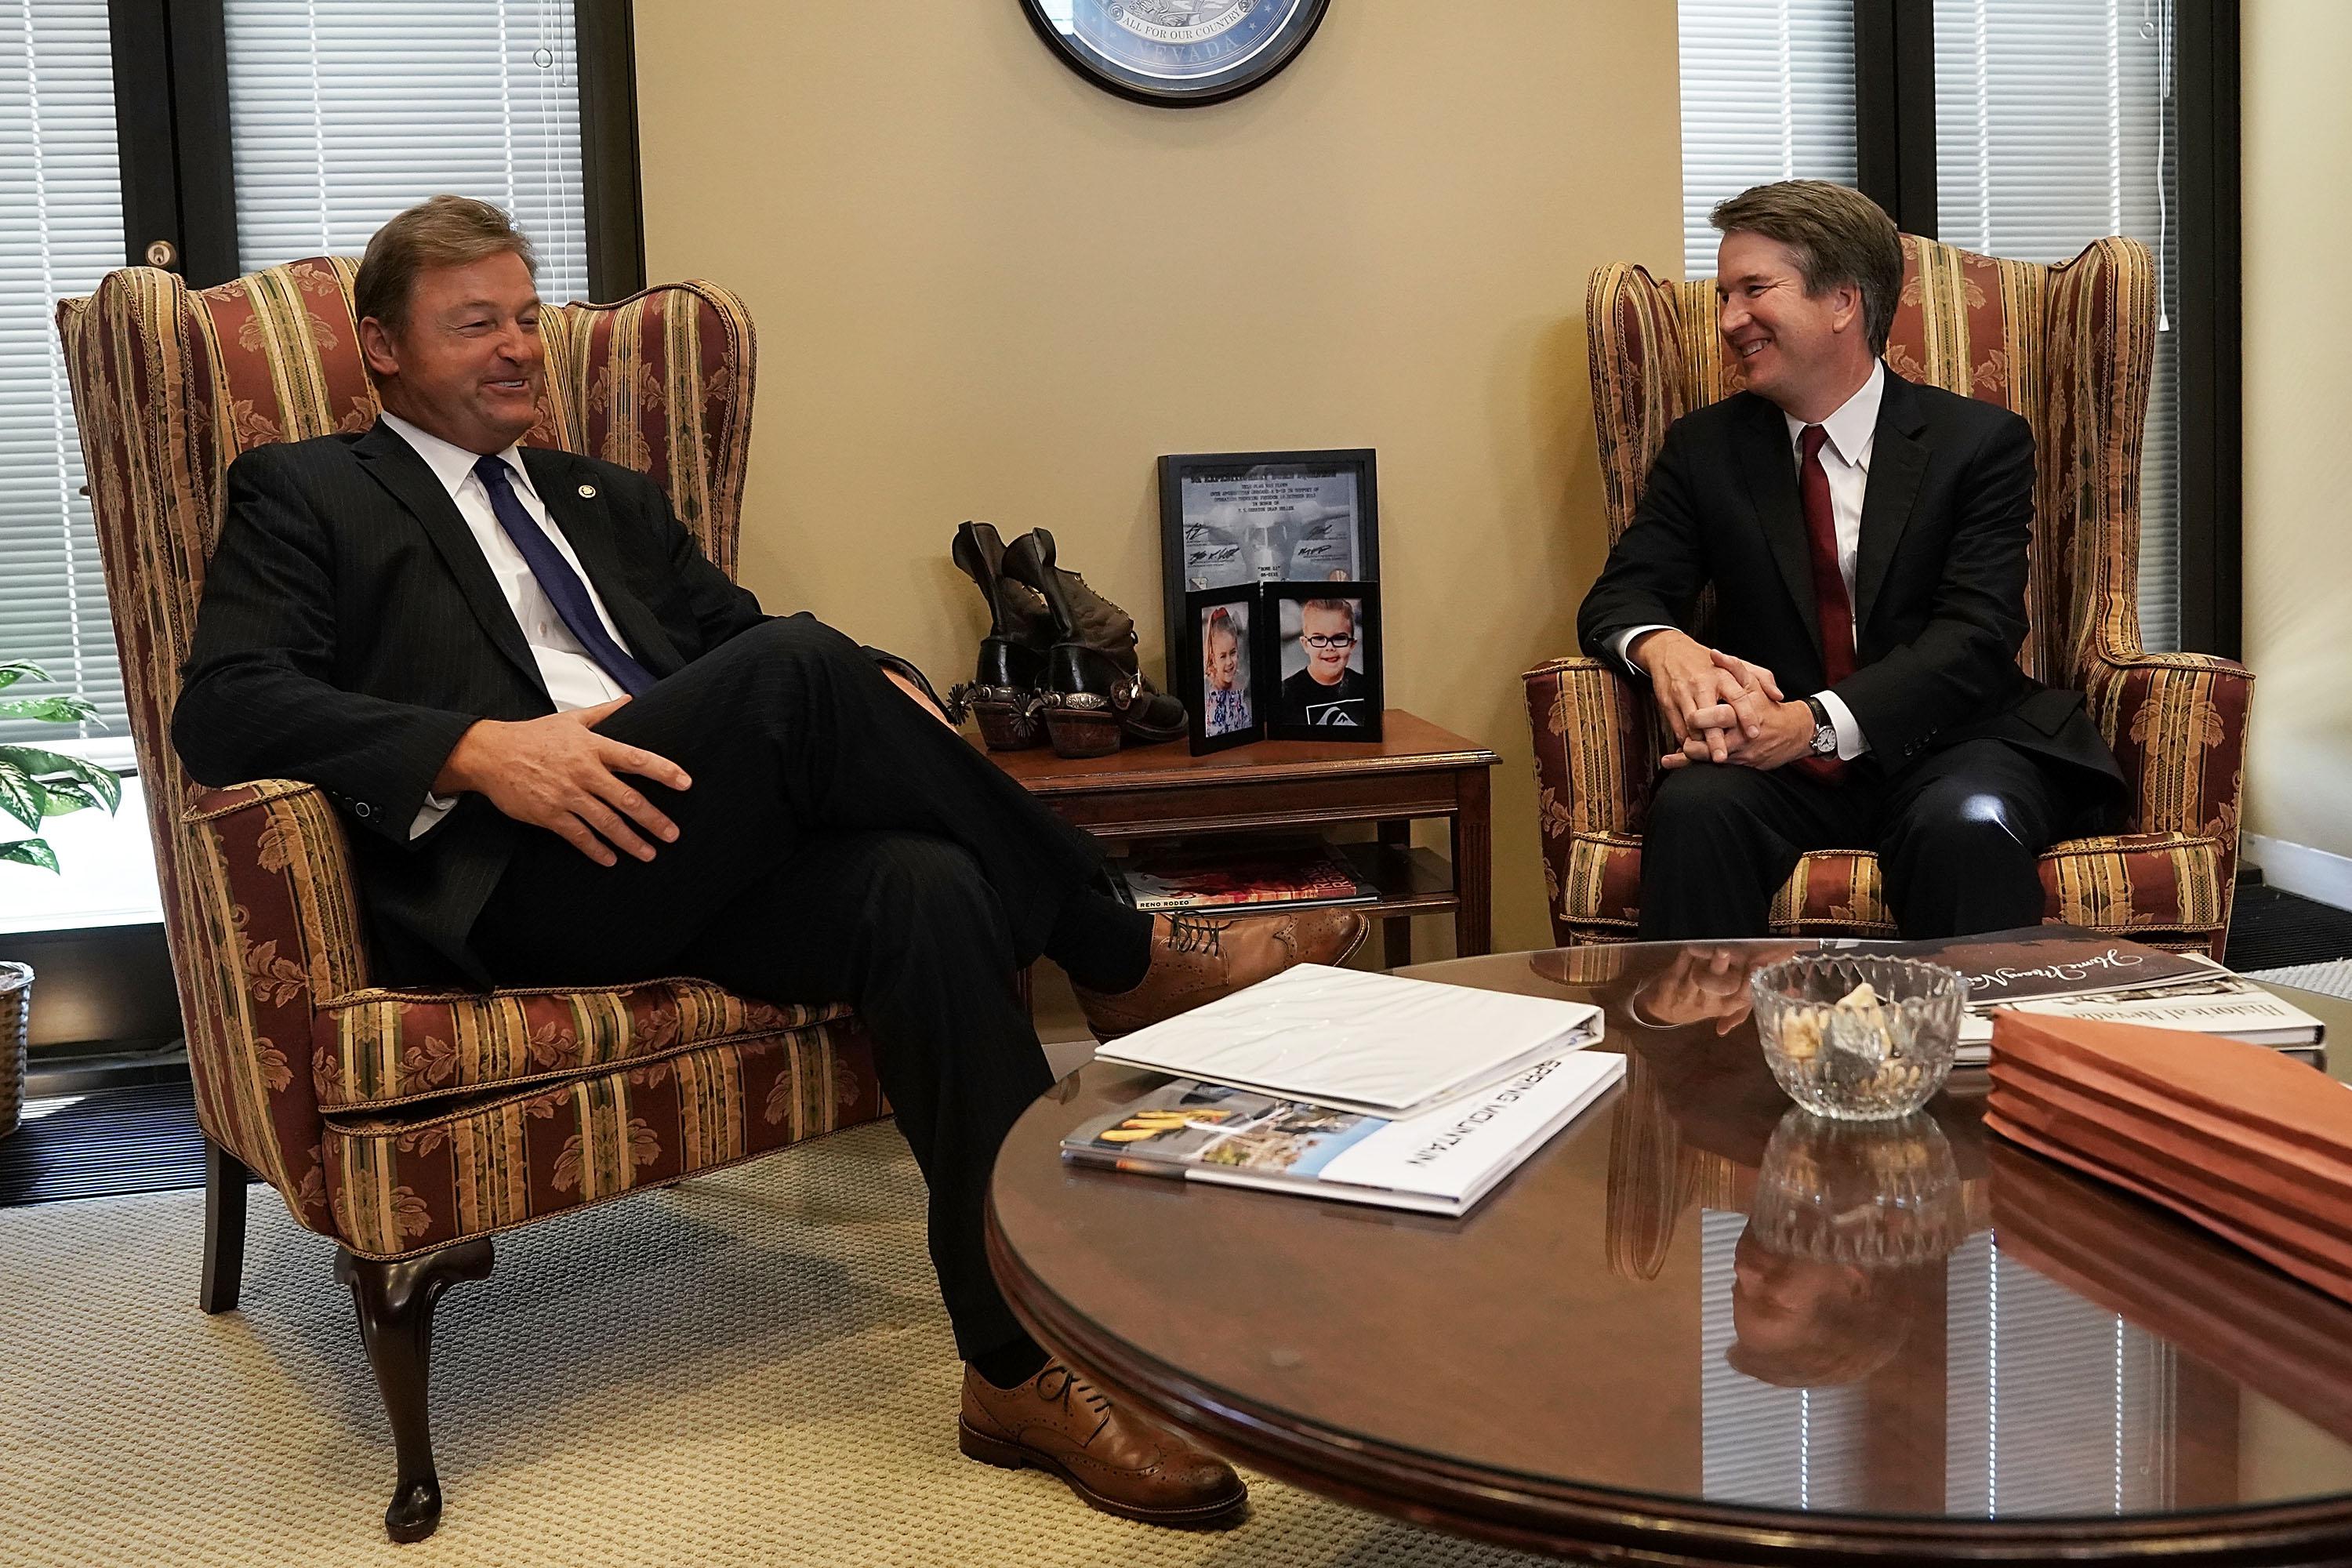 Sen. Dean Heller (L) meets with Supreme Court nominee Judge Brett Kavanaugh in his office on Capitol Hill.